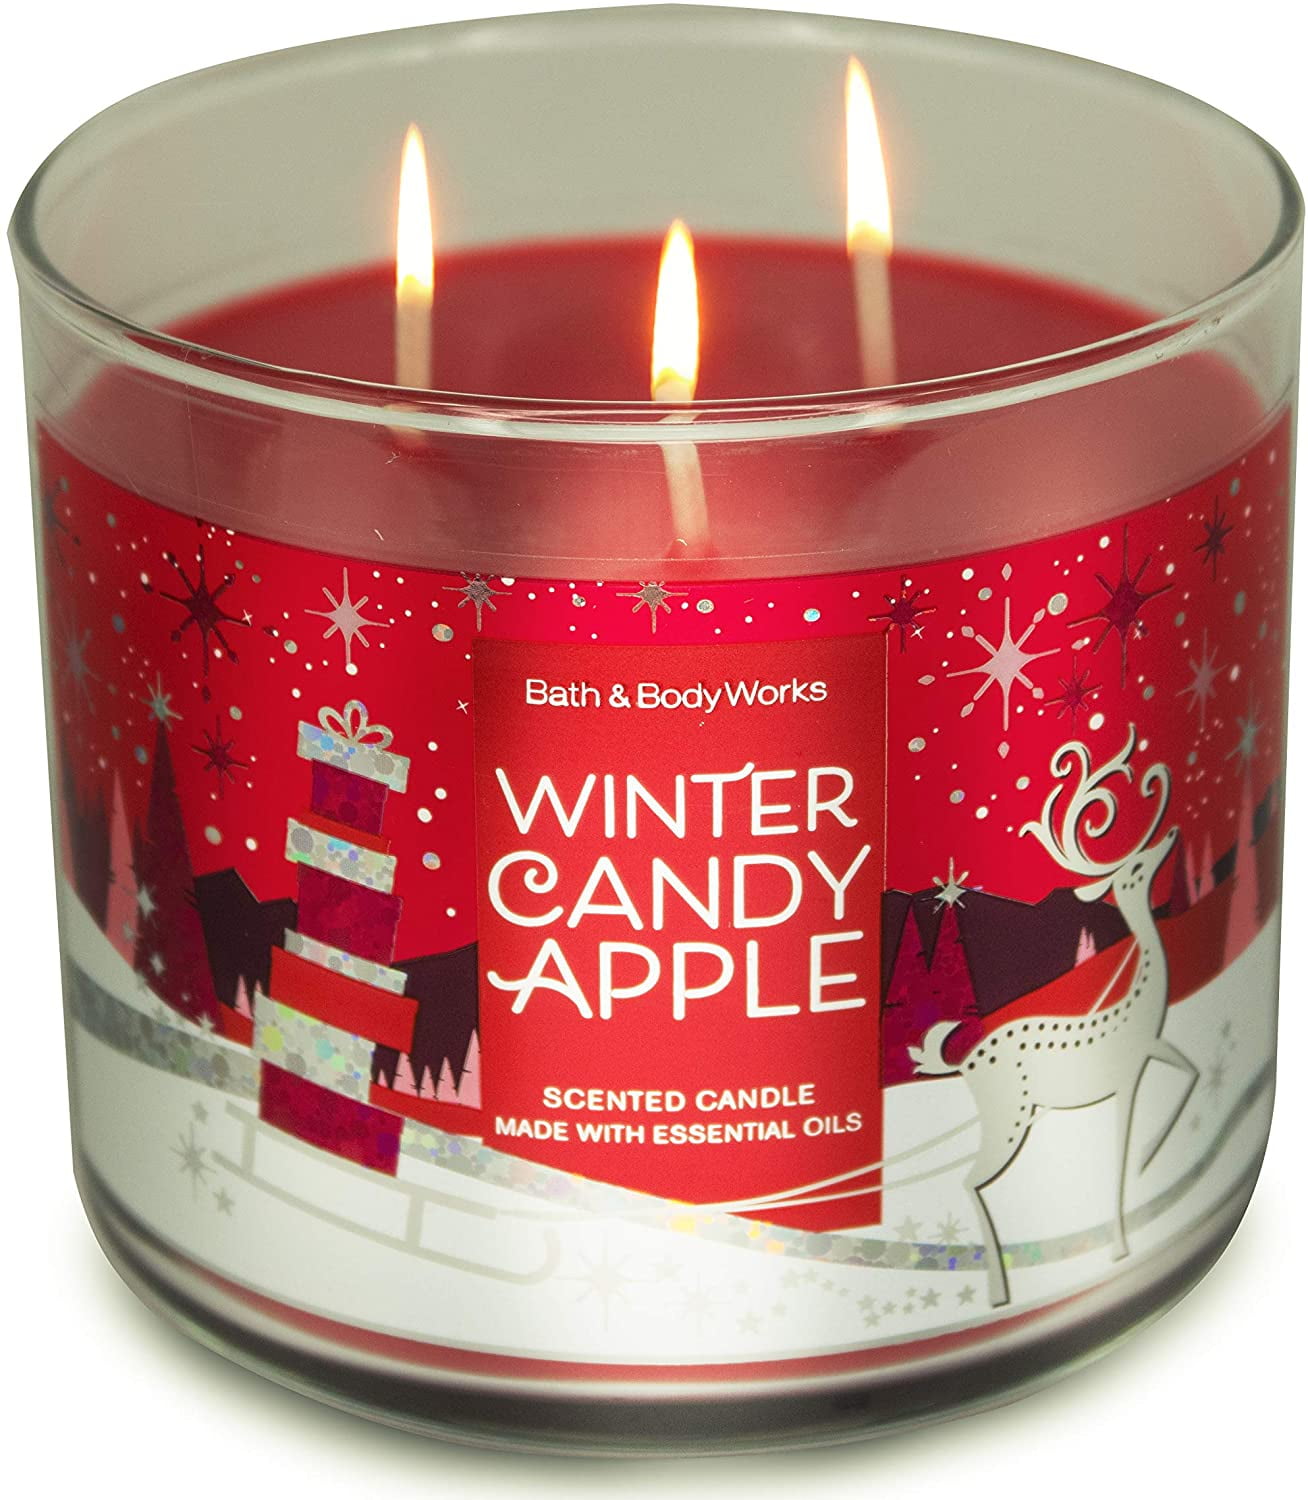 White Barn Bath and Body Works, 3-Wick Candle w/Essential Oils - 14.5 oz -  2020 Holidays Scents! (Winter Candy Apple) - Walmart.com